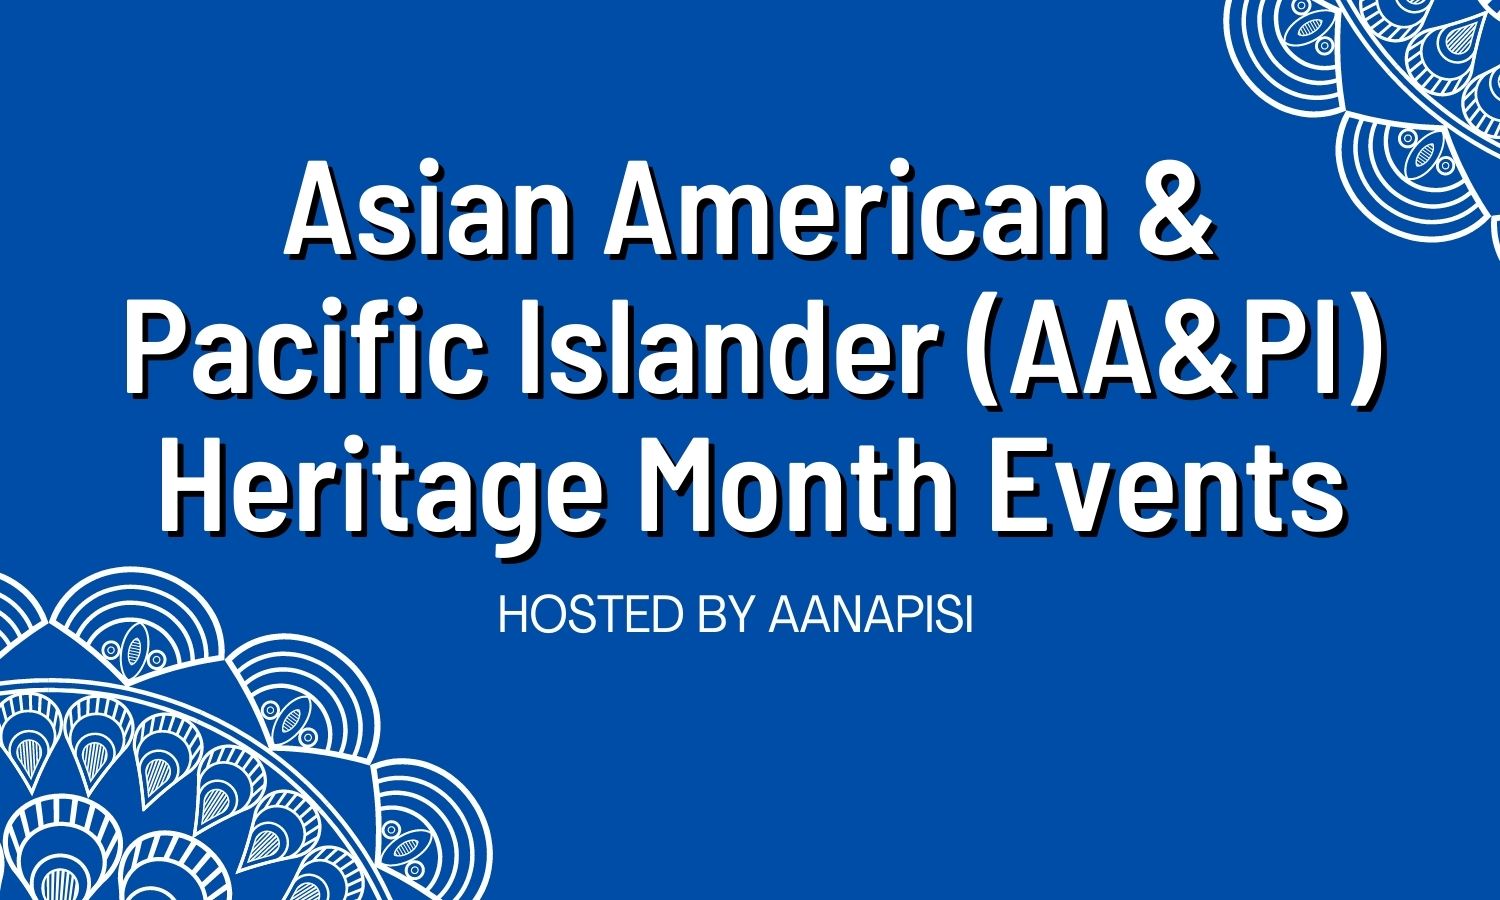 Asian American & Pacific Islander (AA&PI) Heritage Month Events